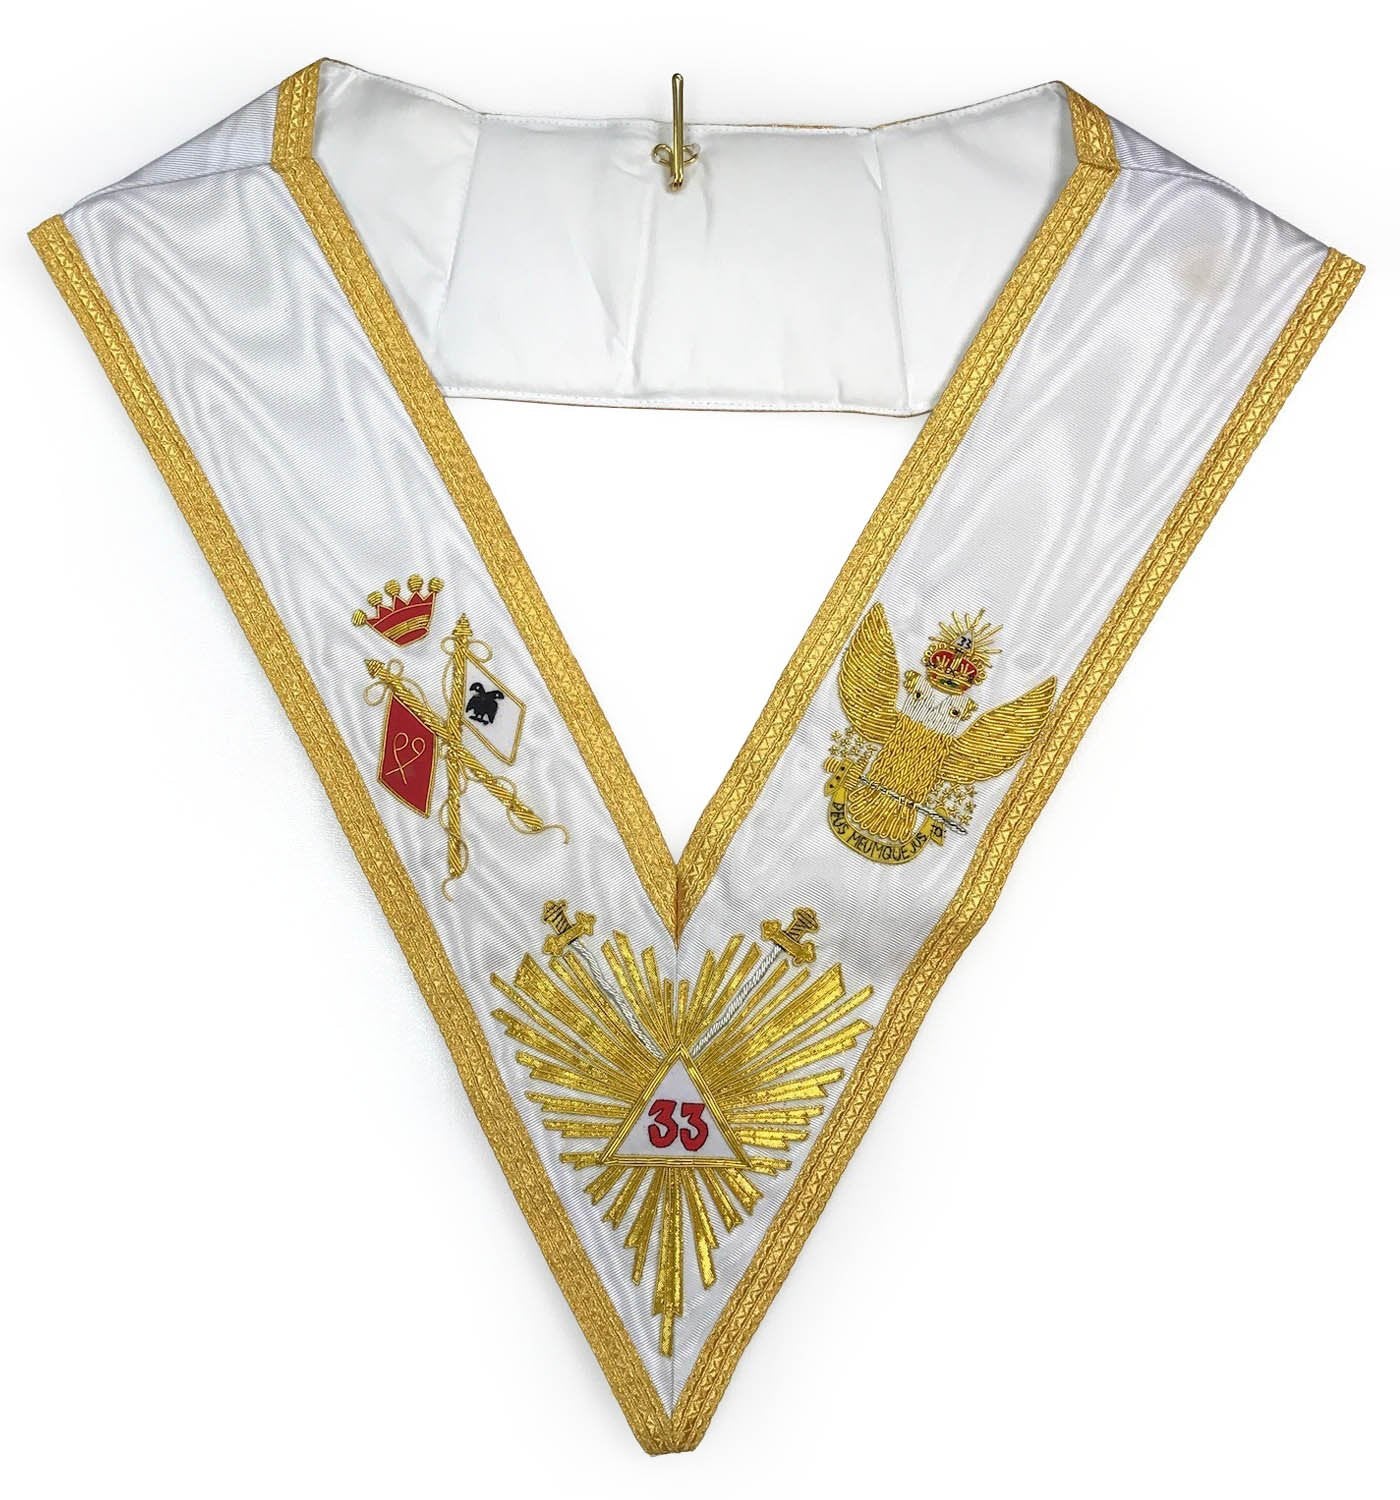 33rd Degree Scottish Rite Regalia Set - WINGS UP All Countries Flags Hand Embroidered - Bricks Masons